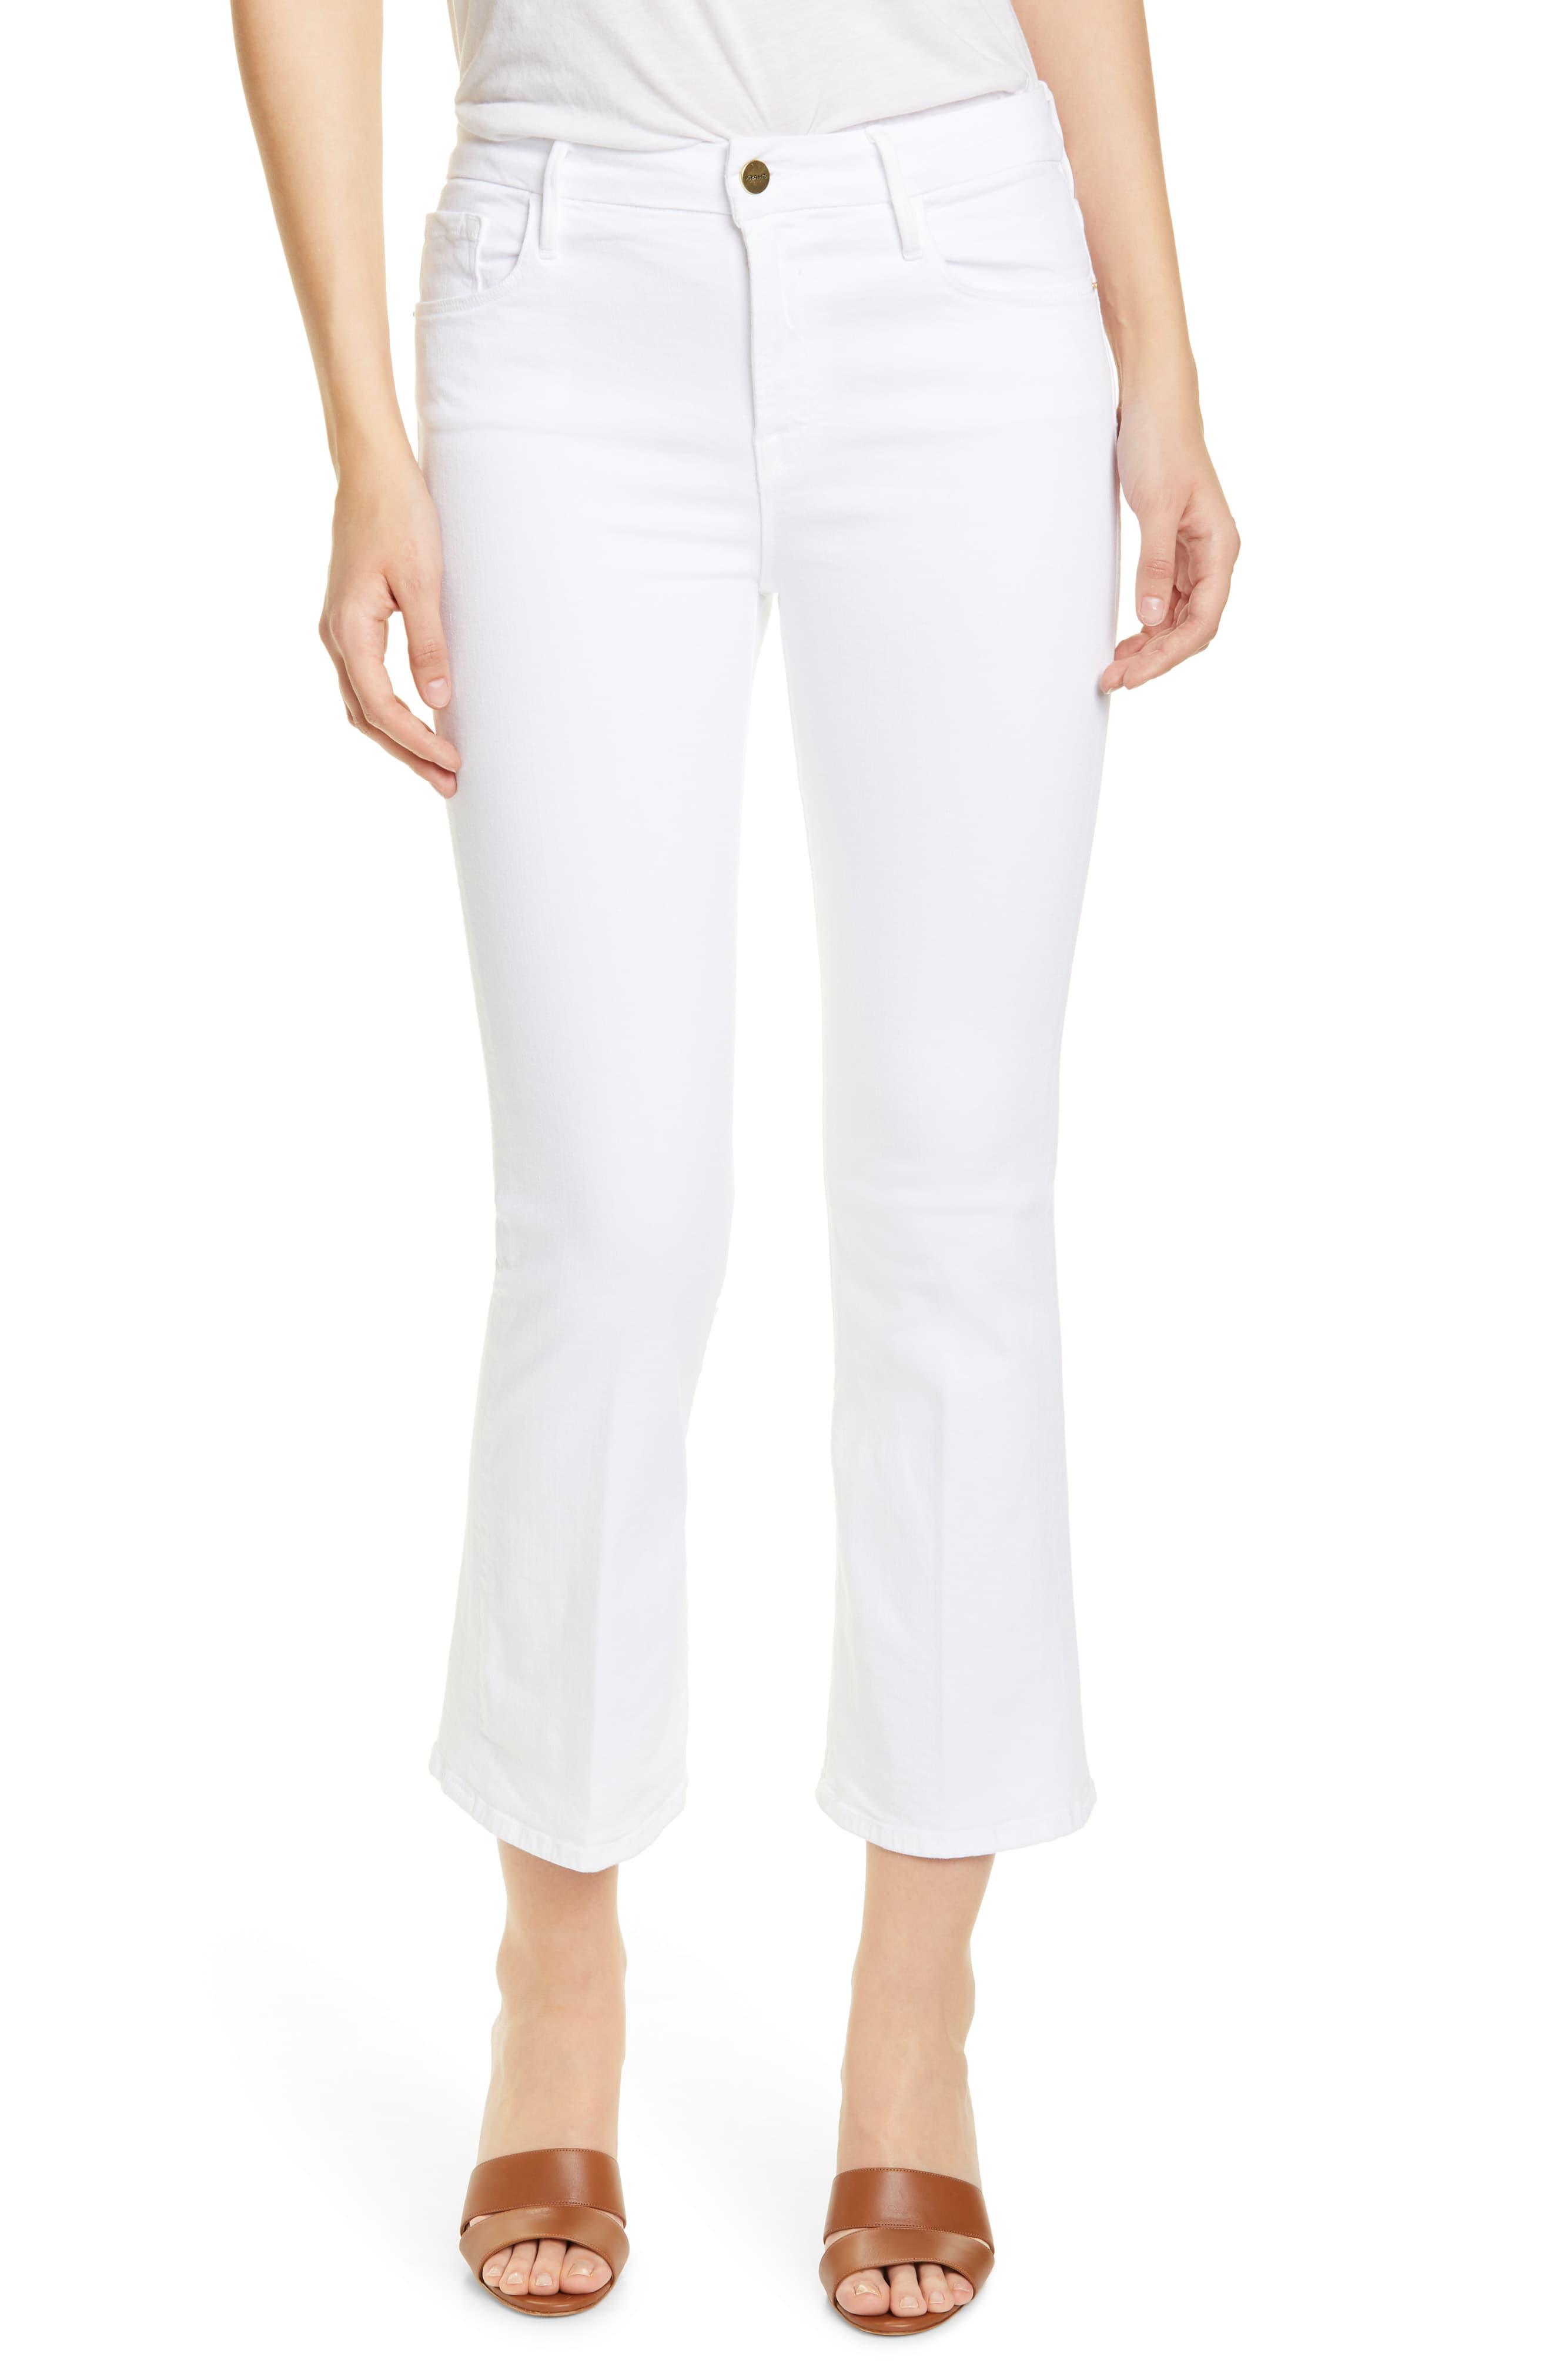 FRAME Denim Le Crop Mini Bootcut Jeans in White - Save 30% - Lyst